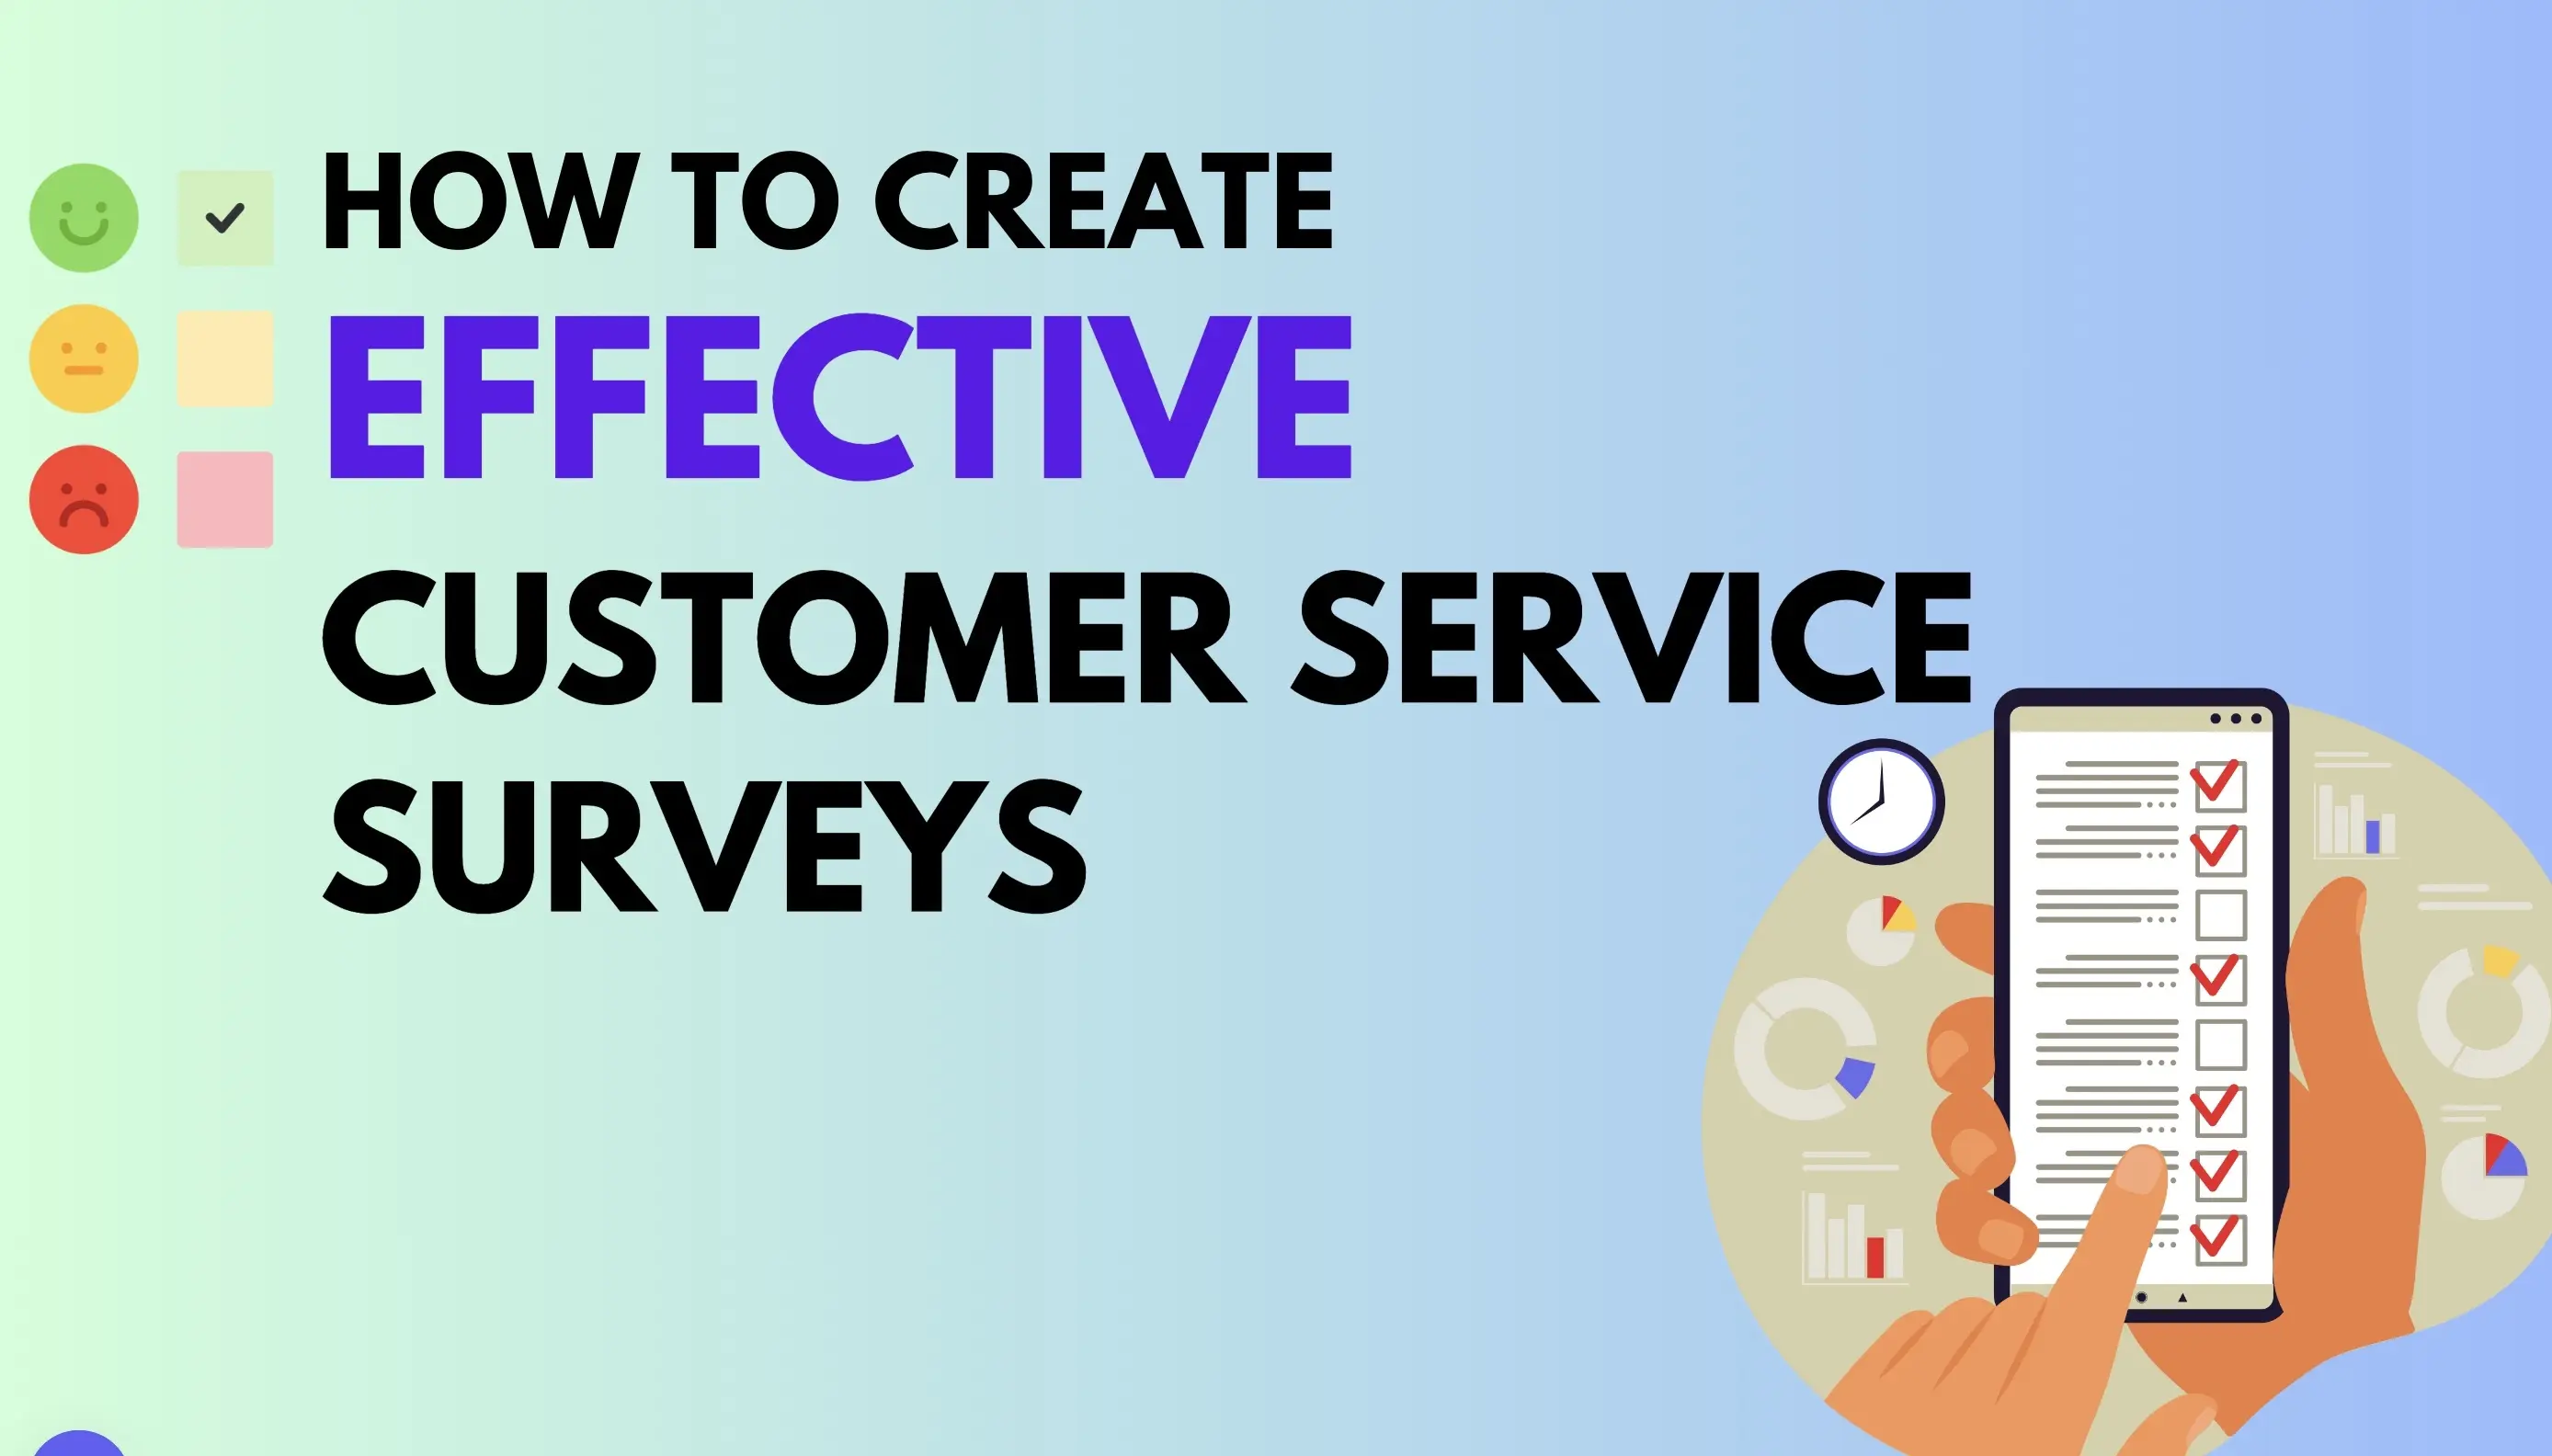 Boost Your Customer Care with These Proven Customer Satisfaction Survey Samples